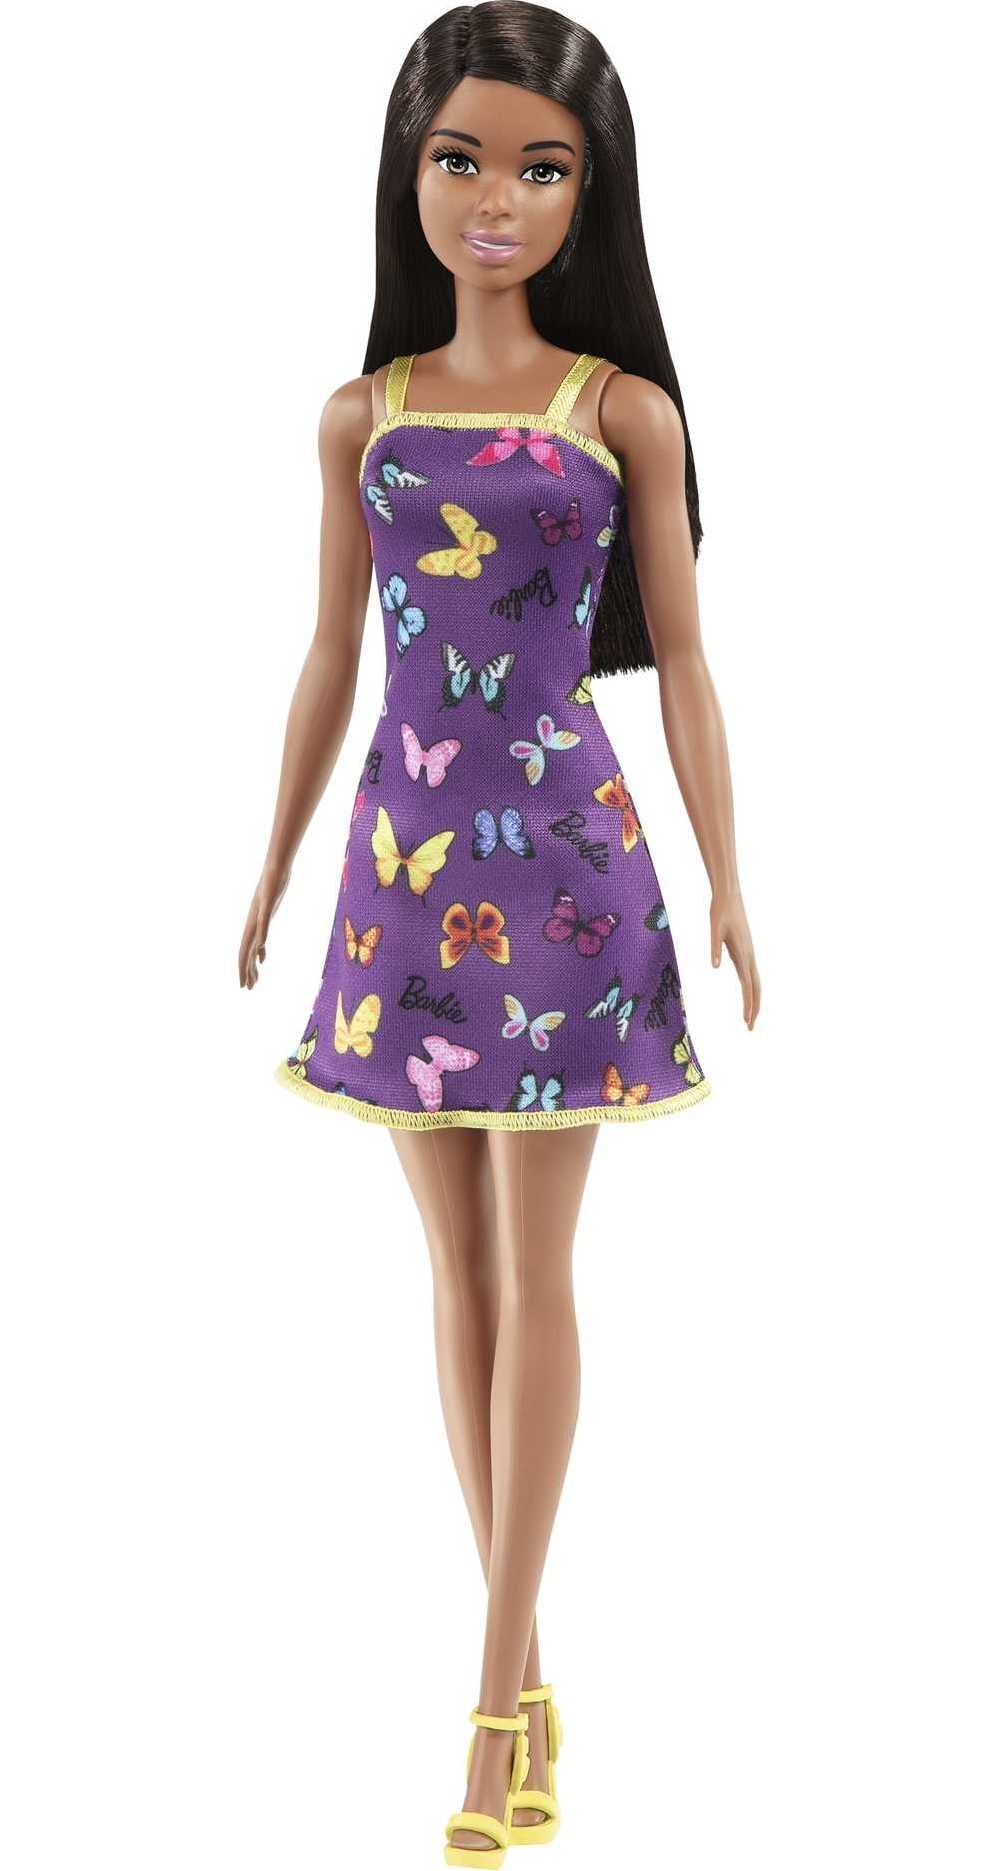 Barbie Fashion Doll with Black Hair Dressed in Colorful Butterfly Print Dress